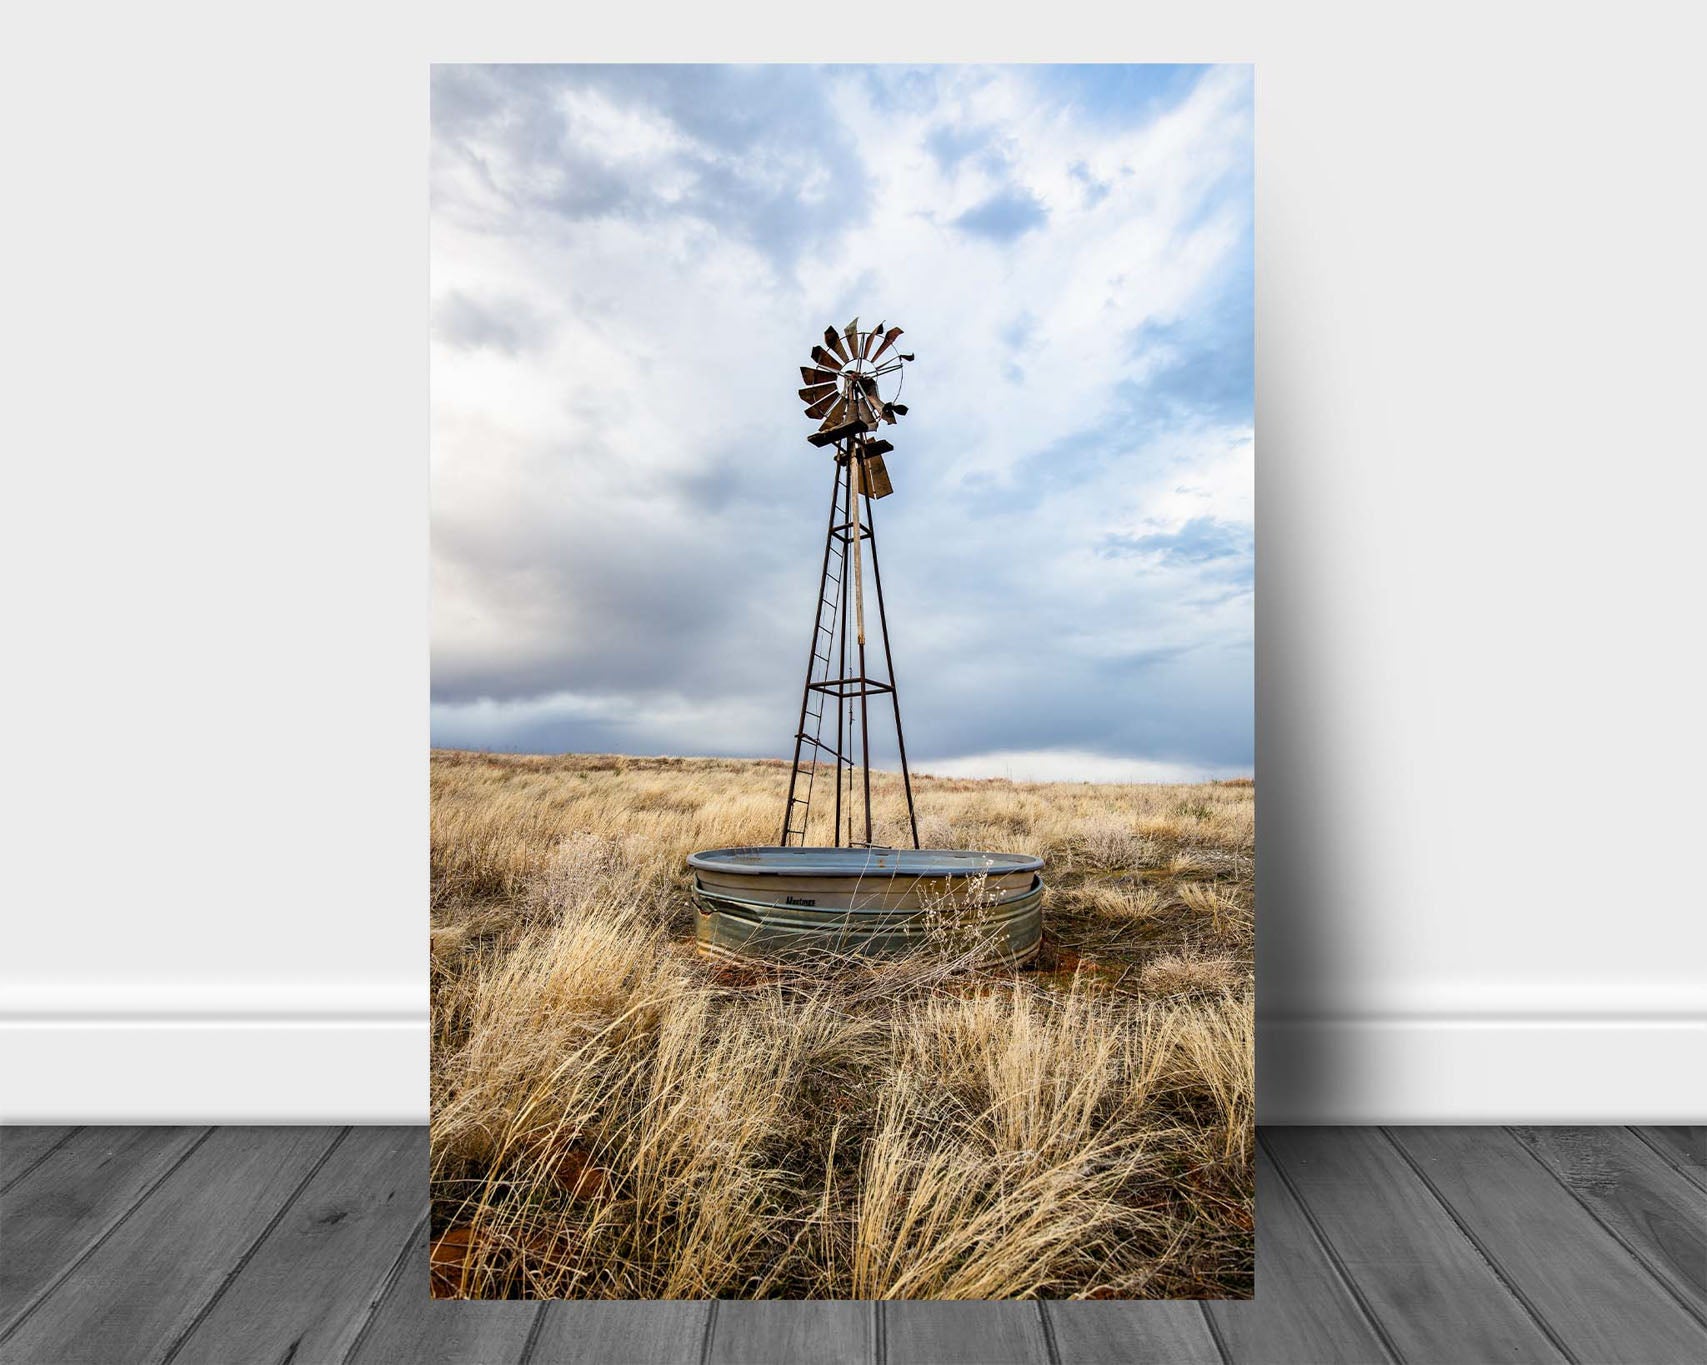 Country aluminum metal print wall art of an old windmill and water tank in golden prairie grass on an early spring day in Oklahoma by Sean Ramsey of Southern Plains Photography.